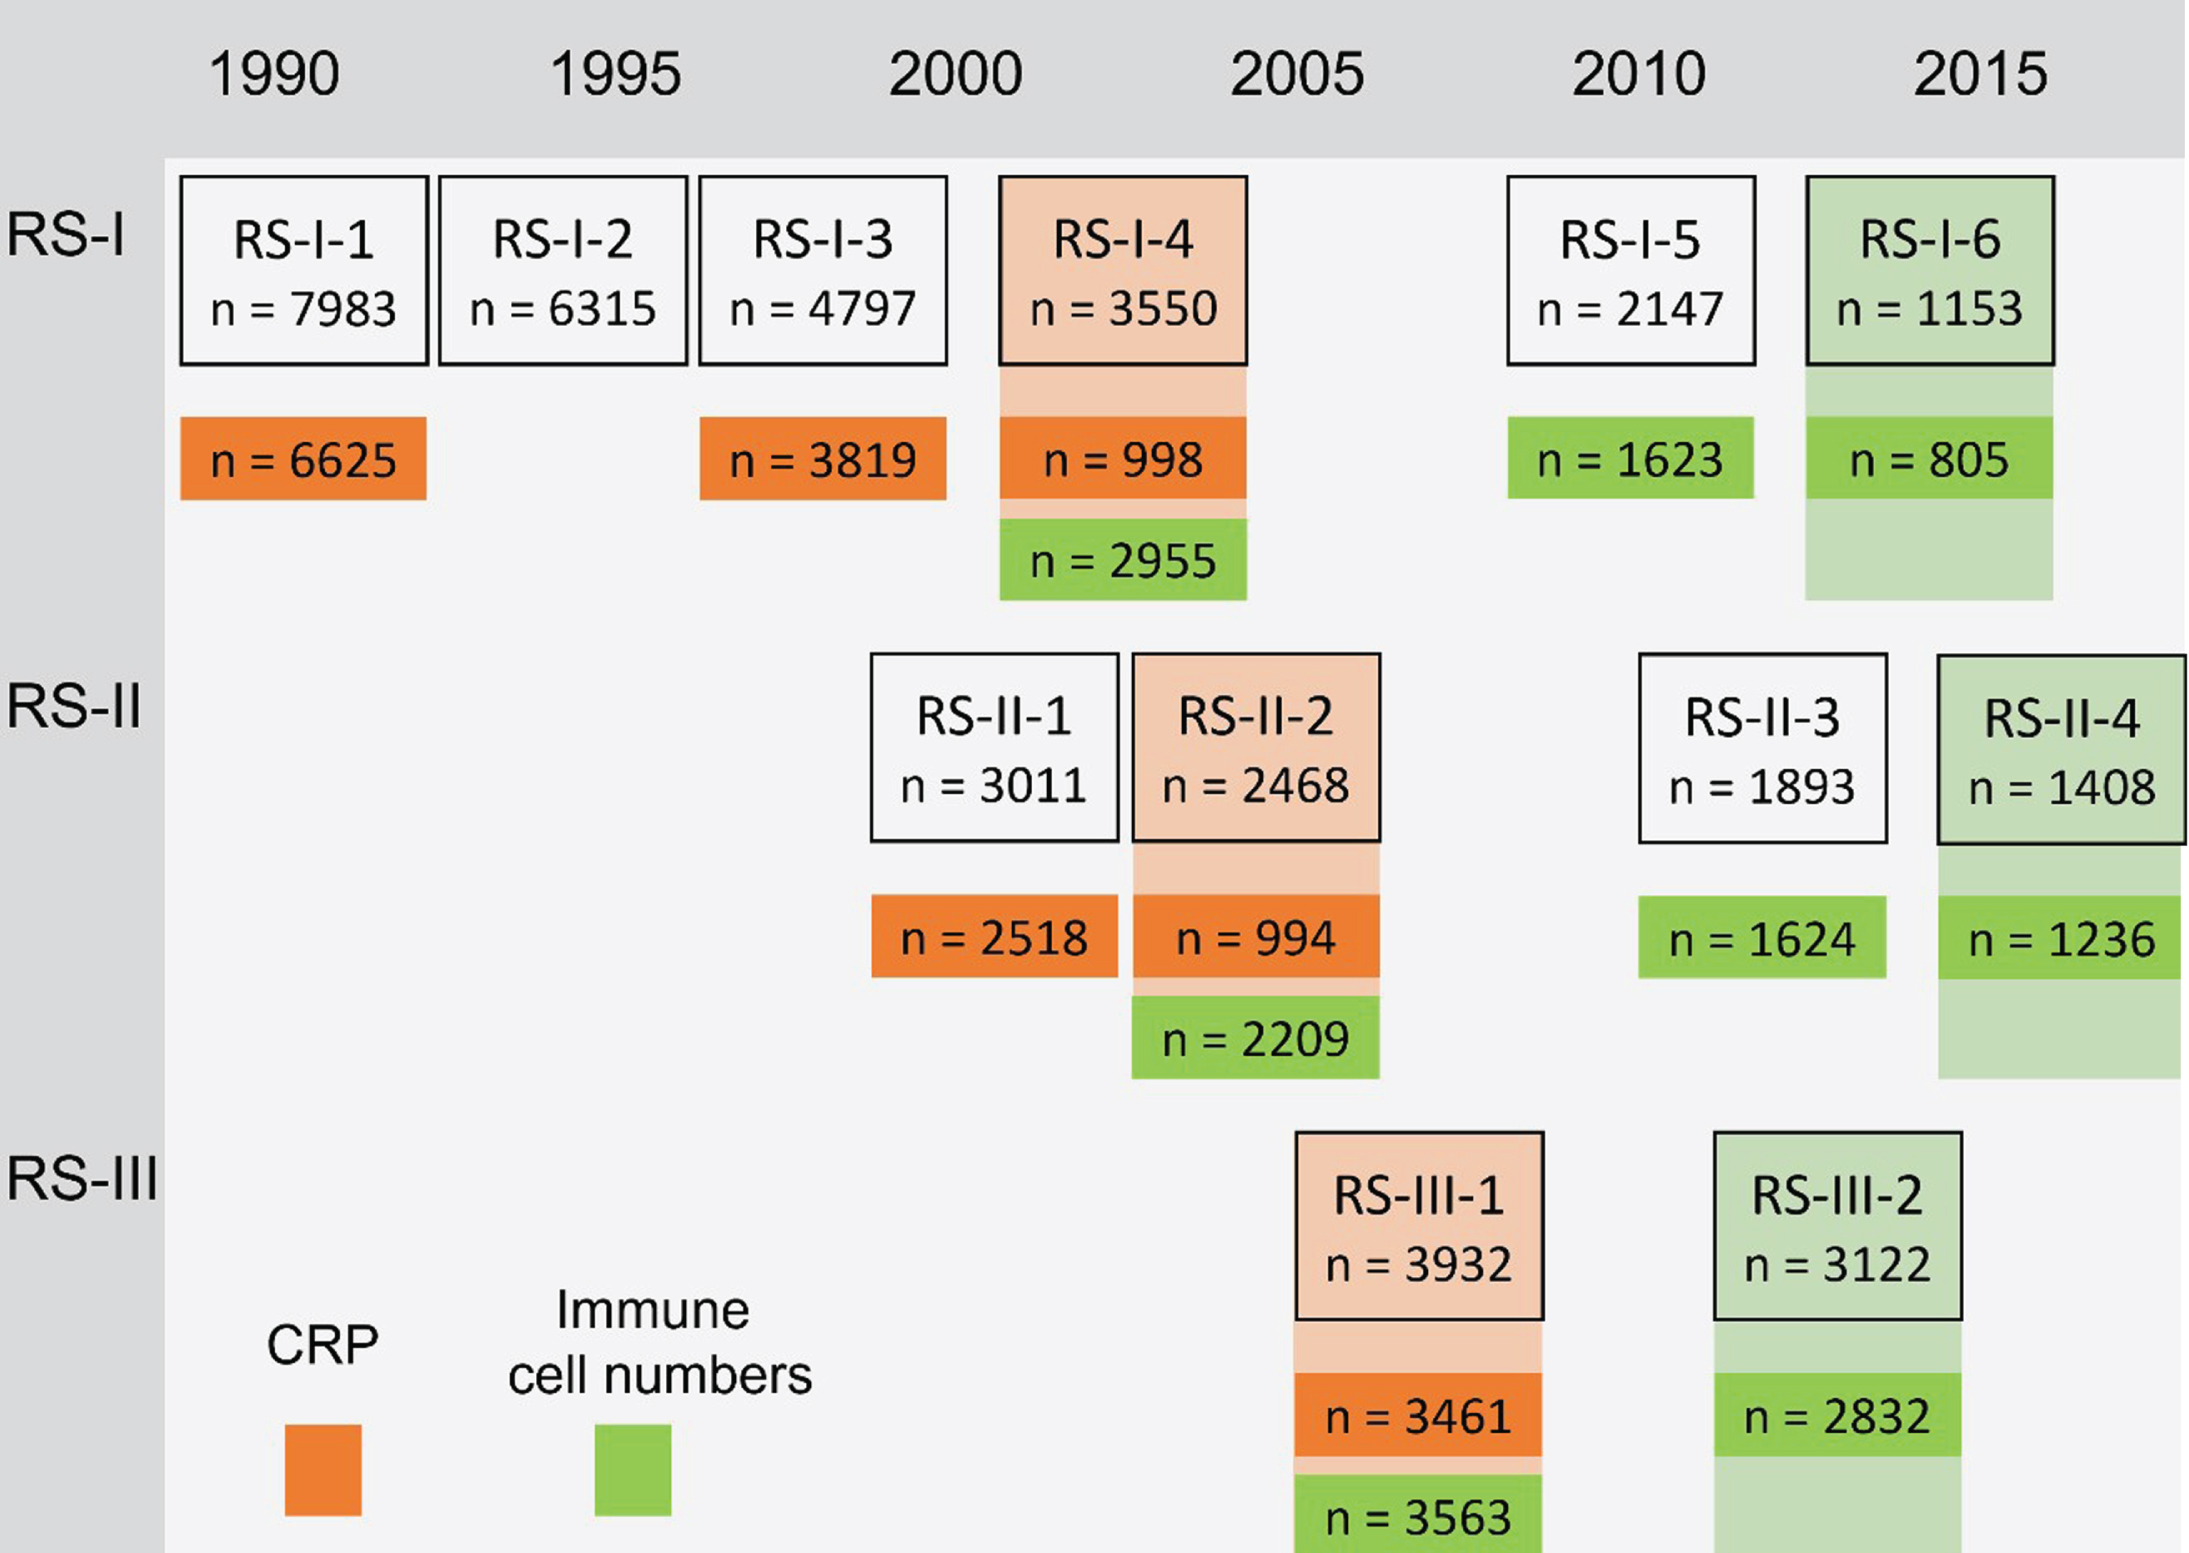 Study measurements and number of participants. CRP, C-reactive protein. Numbers in the boxes represent the number of individuals who participated in the shown study round. Numbers in orange are participants who undertook CRP measurements and numbers in green participants who undertook measurements of peripheral immune cell numbers. In RS-I-4 and RS-II-2, CRP was only measured in a random subset, by taking into account sex and age representation. The last measurement of each of the markers (shown in shaded orange or green) was used for the analyses of prevalent PD, if the last measurement was missing, the previous measurement was used (n prevalent PD for analyses CRP = 105, n prevalent PD for analyses peripheral immune cell numbers = 34). For the peripheral immune cell numbers the total number of individuals with any of the markers available is shown, the numbers in the analyses might differ because the specific measurement is missing.